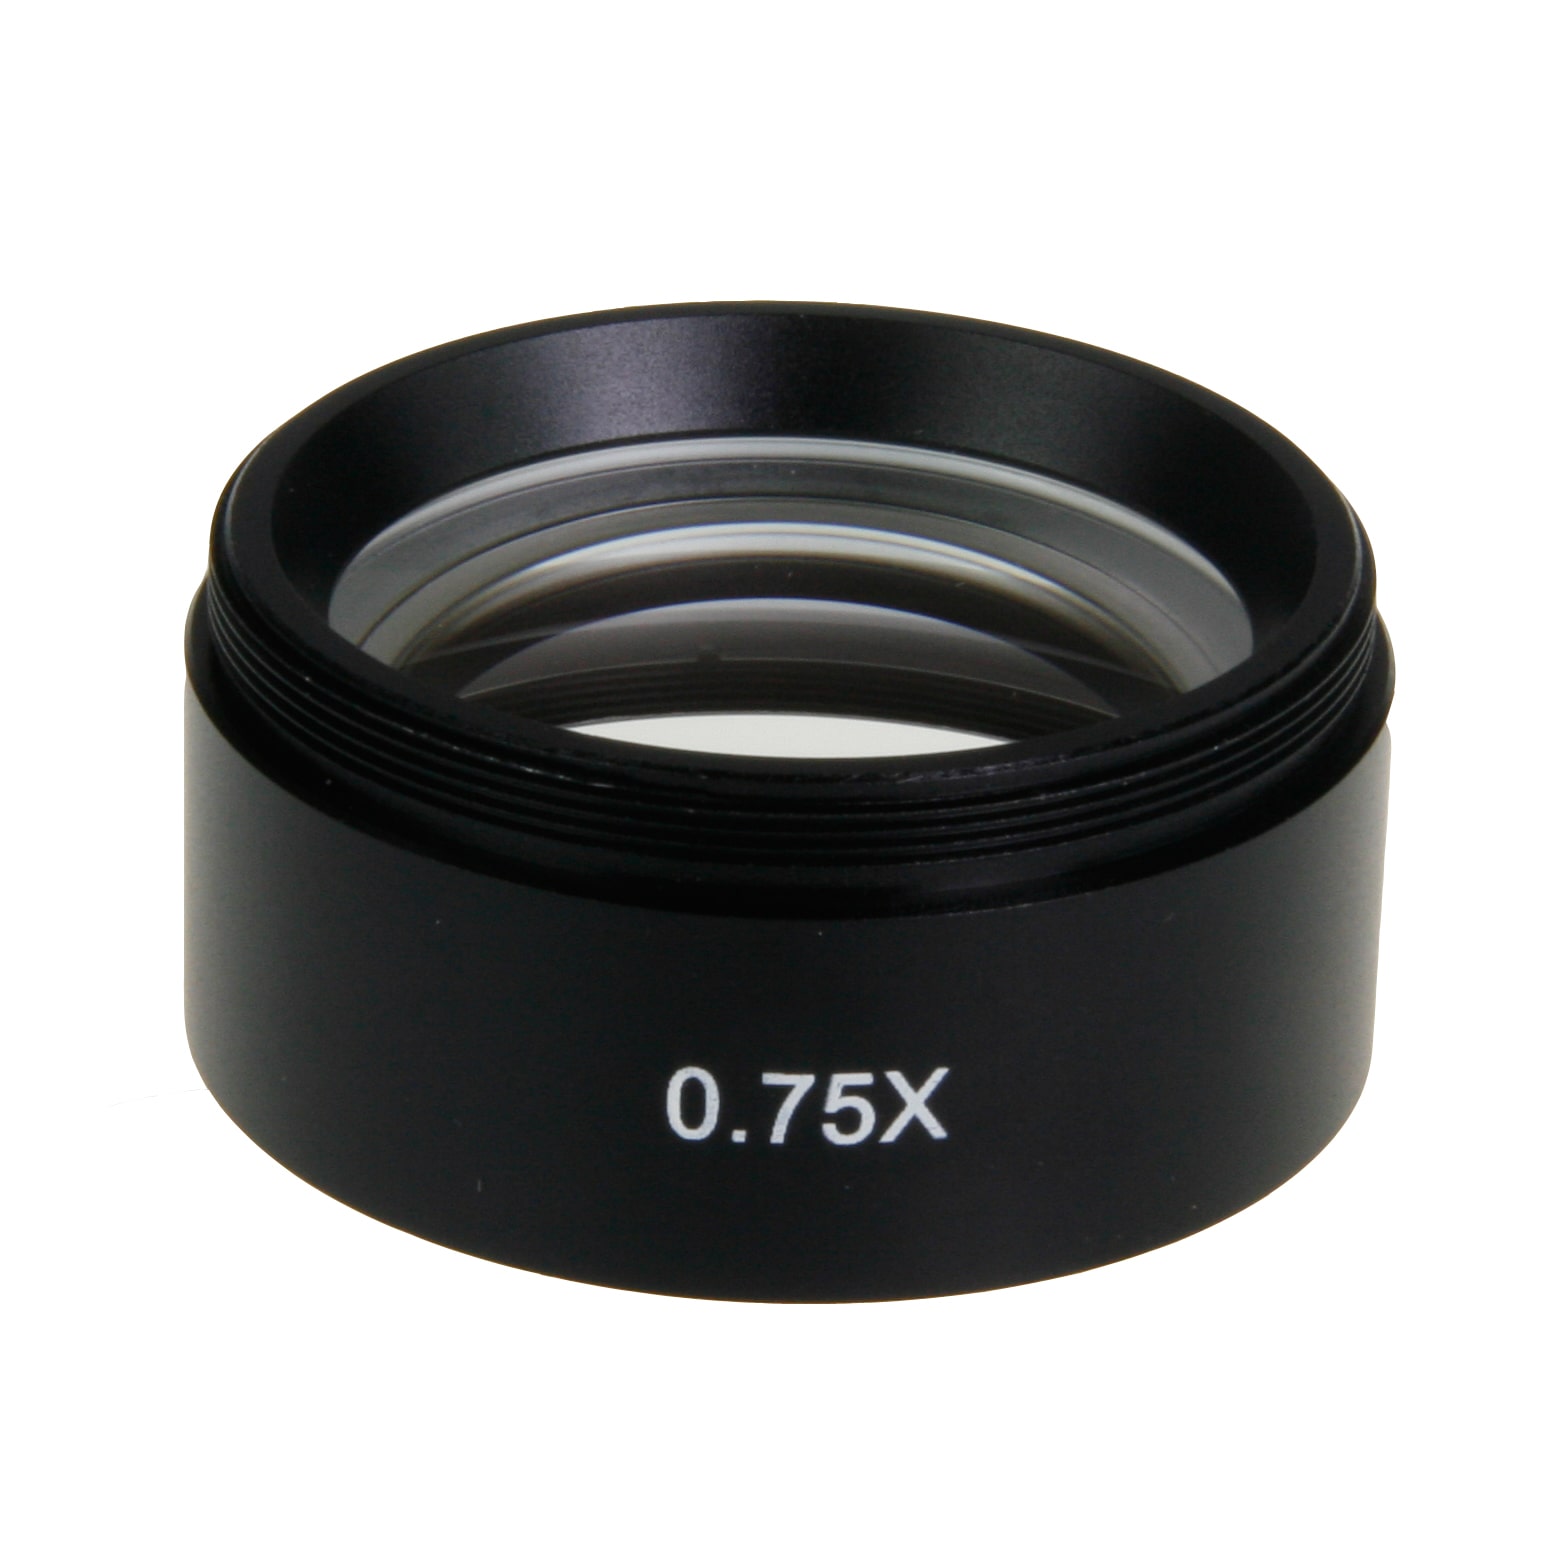 Additional 0.75x Lens for NexiusZoom